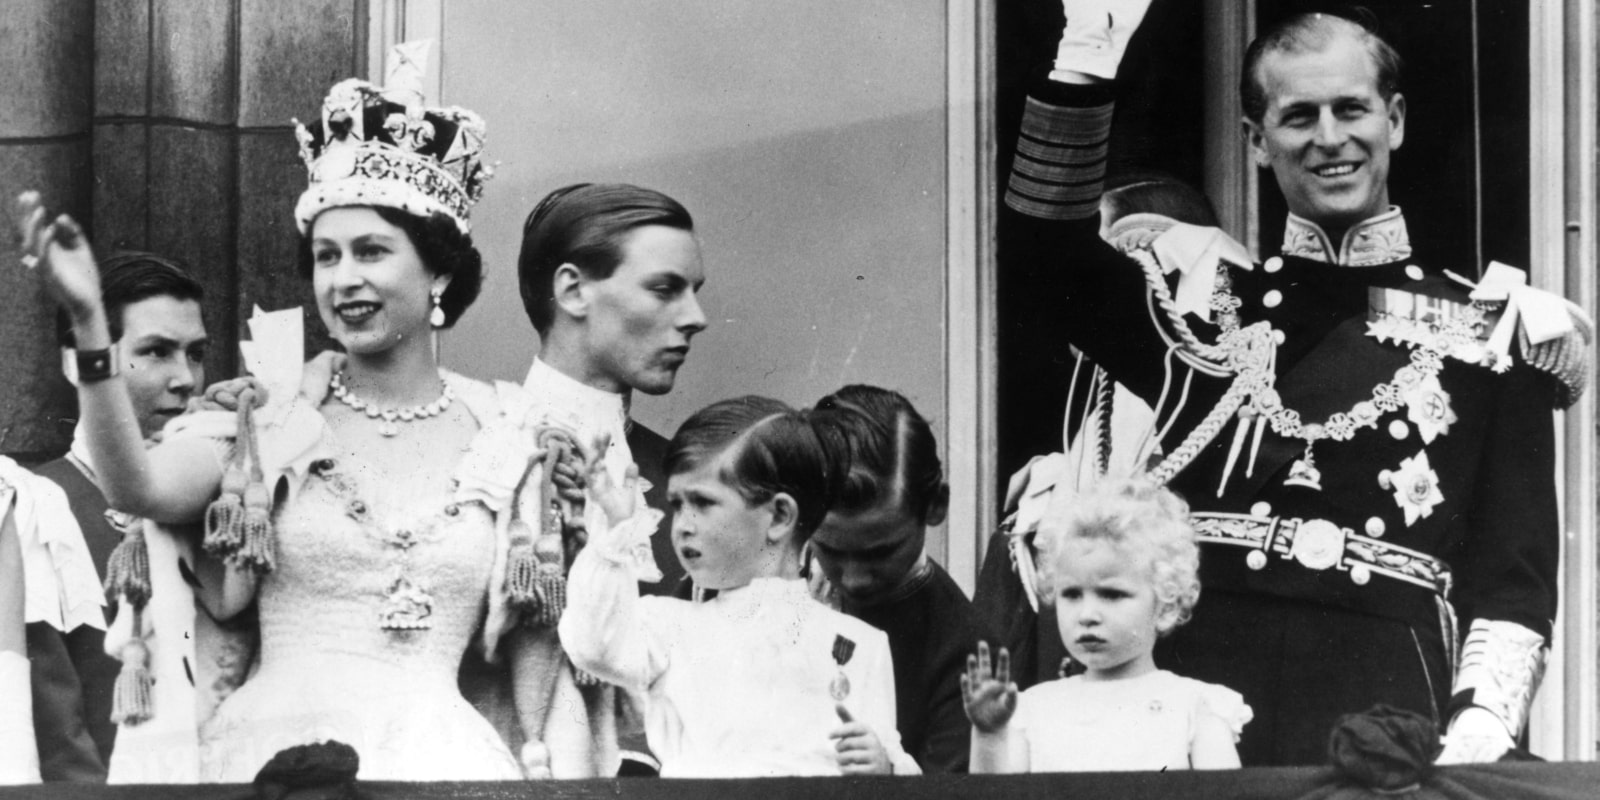 Queen Elizabeth wanted her son Charles to feel special on her coronation, so she gifted him with his own special invitation.